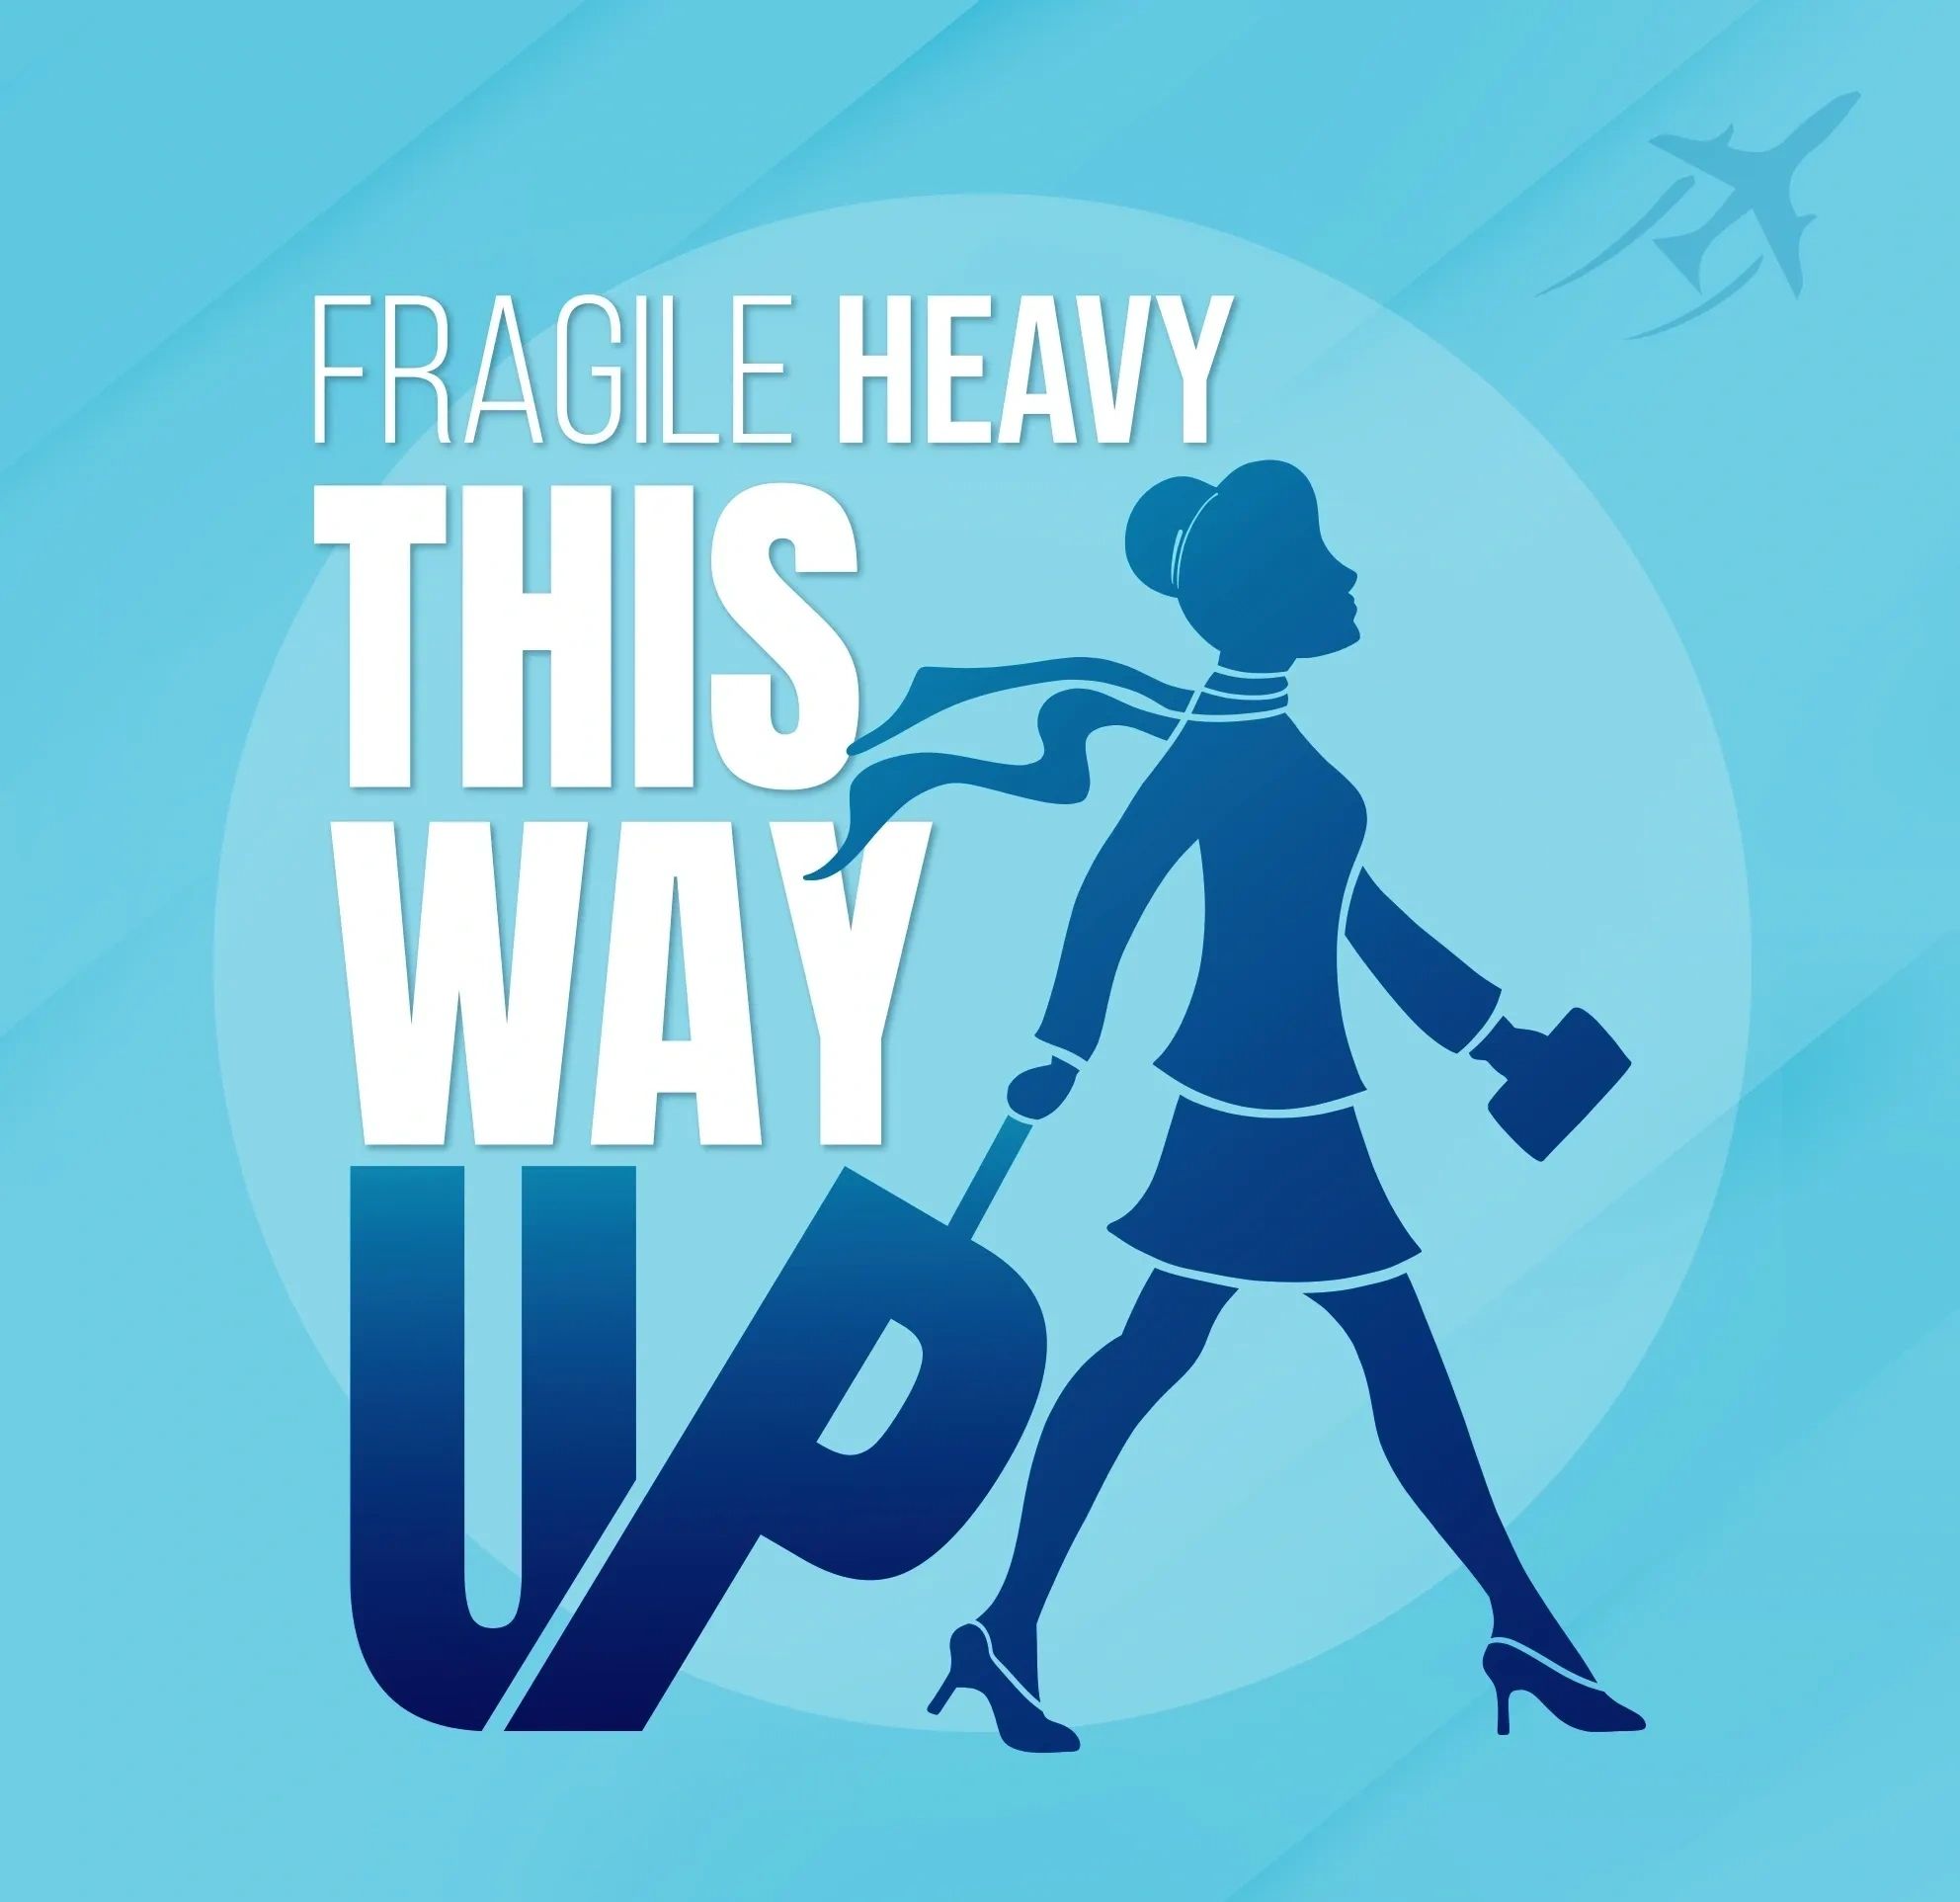 Fragile Heavy This Way Up (logo)